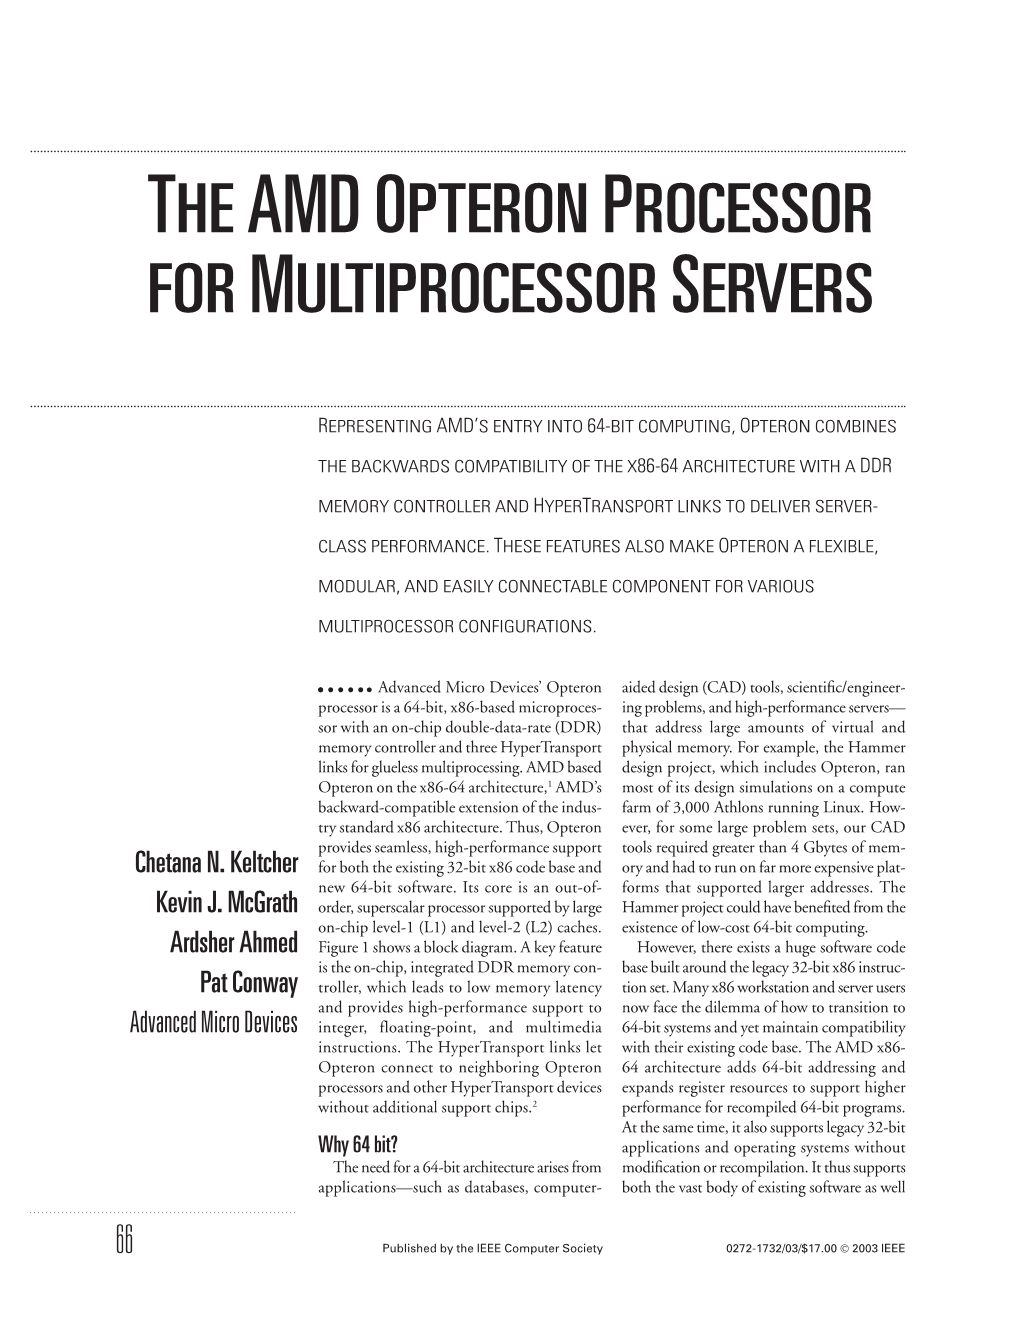 The Amd Opteron Processor for Multiprocessor Servers